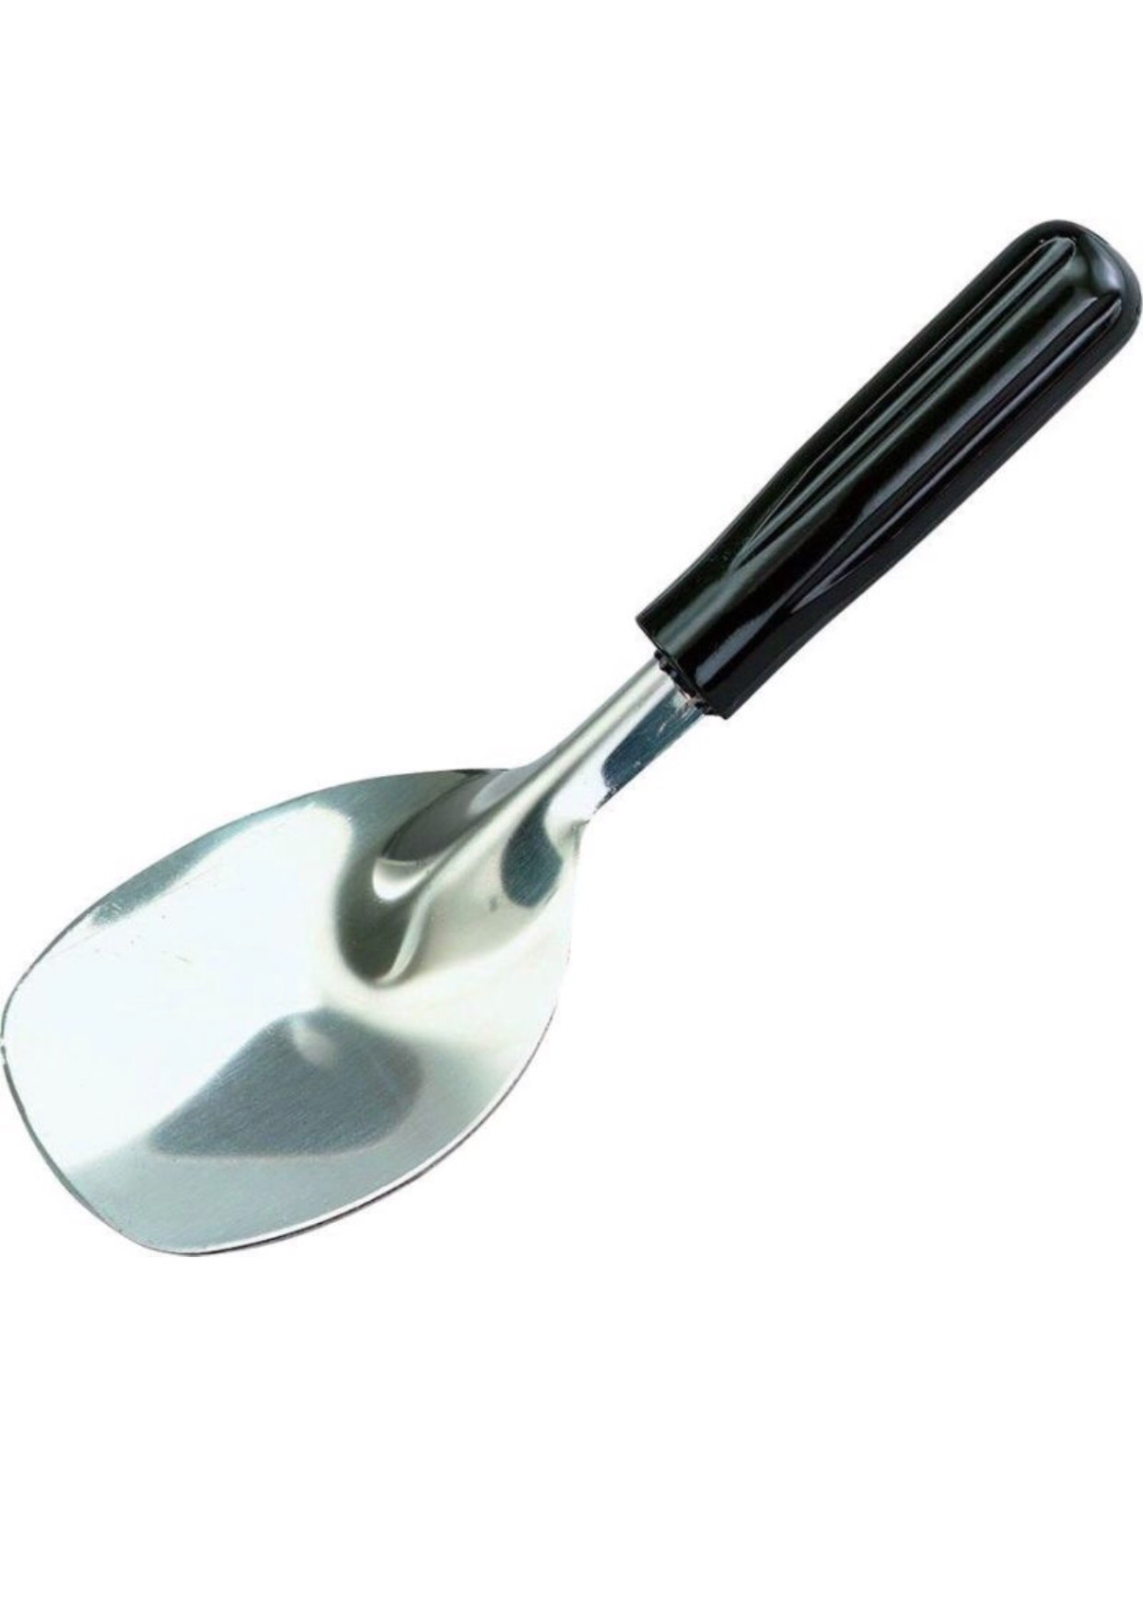 Ice Cream, Spade, Stainless Steel, with Black Plastic Handle - $6.73